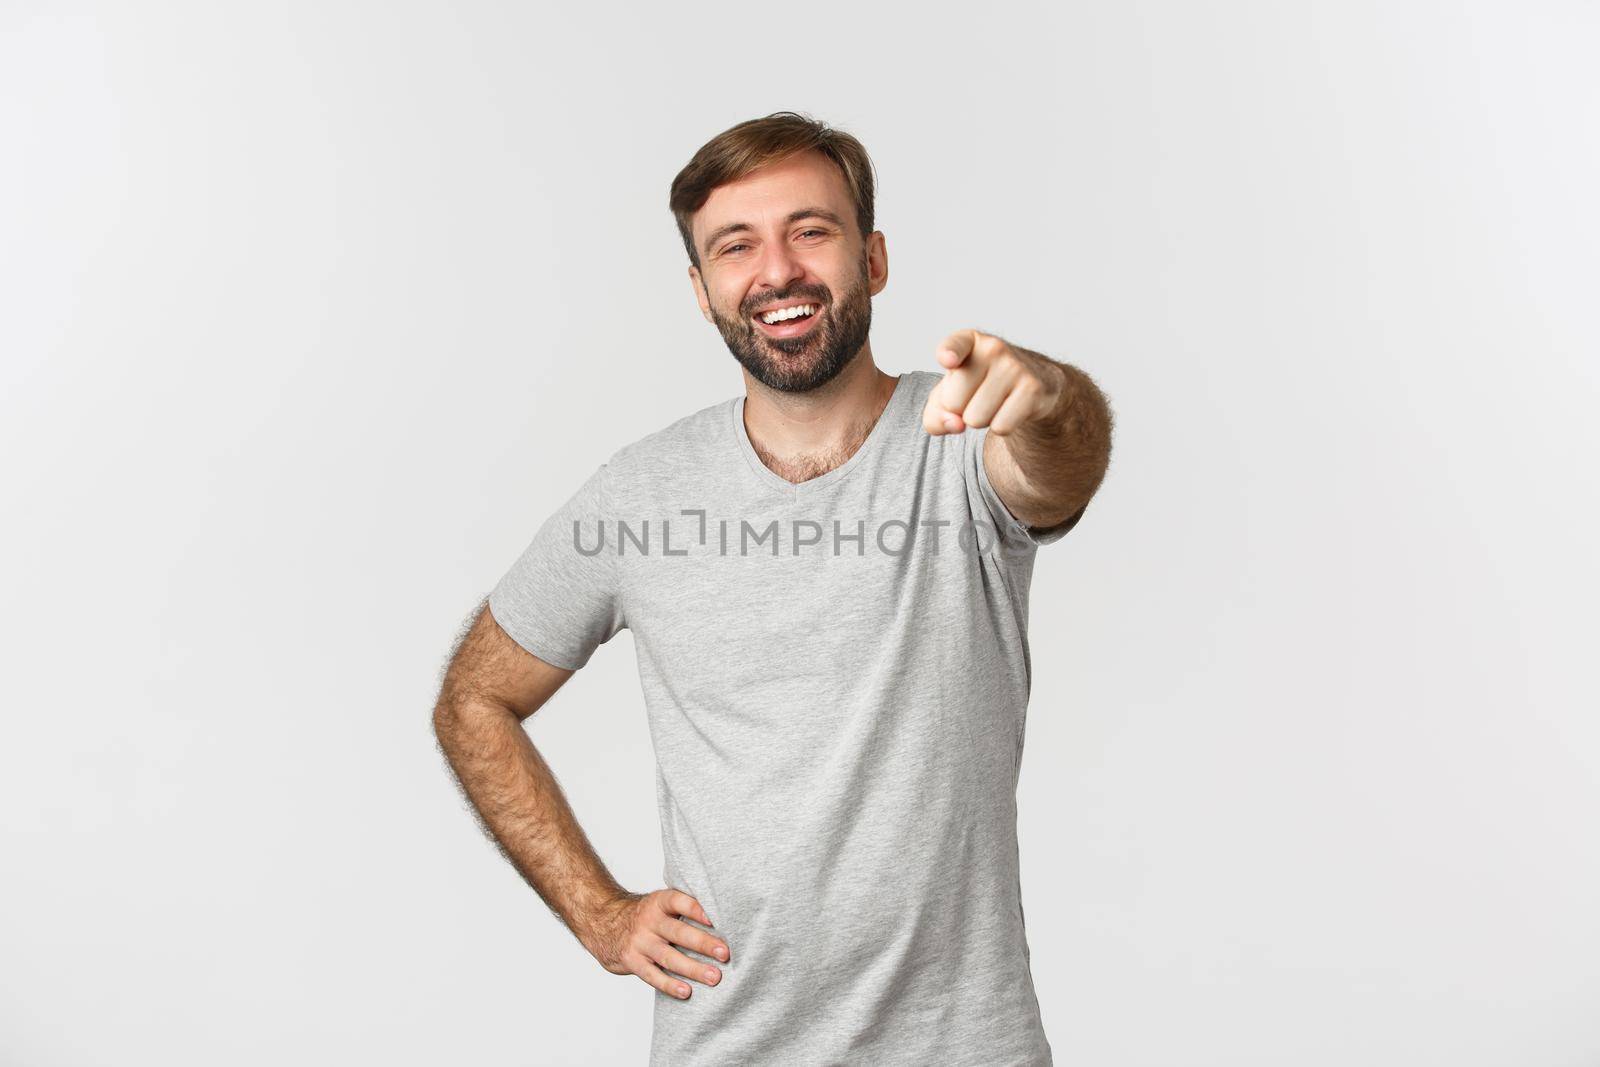 Image of carefree caucasian guy with beard, wearing gray t-shirt, laughing and pointing finger at camera, standing over white background.